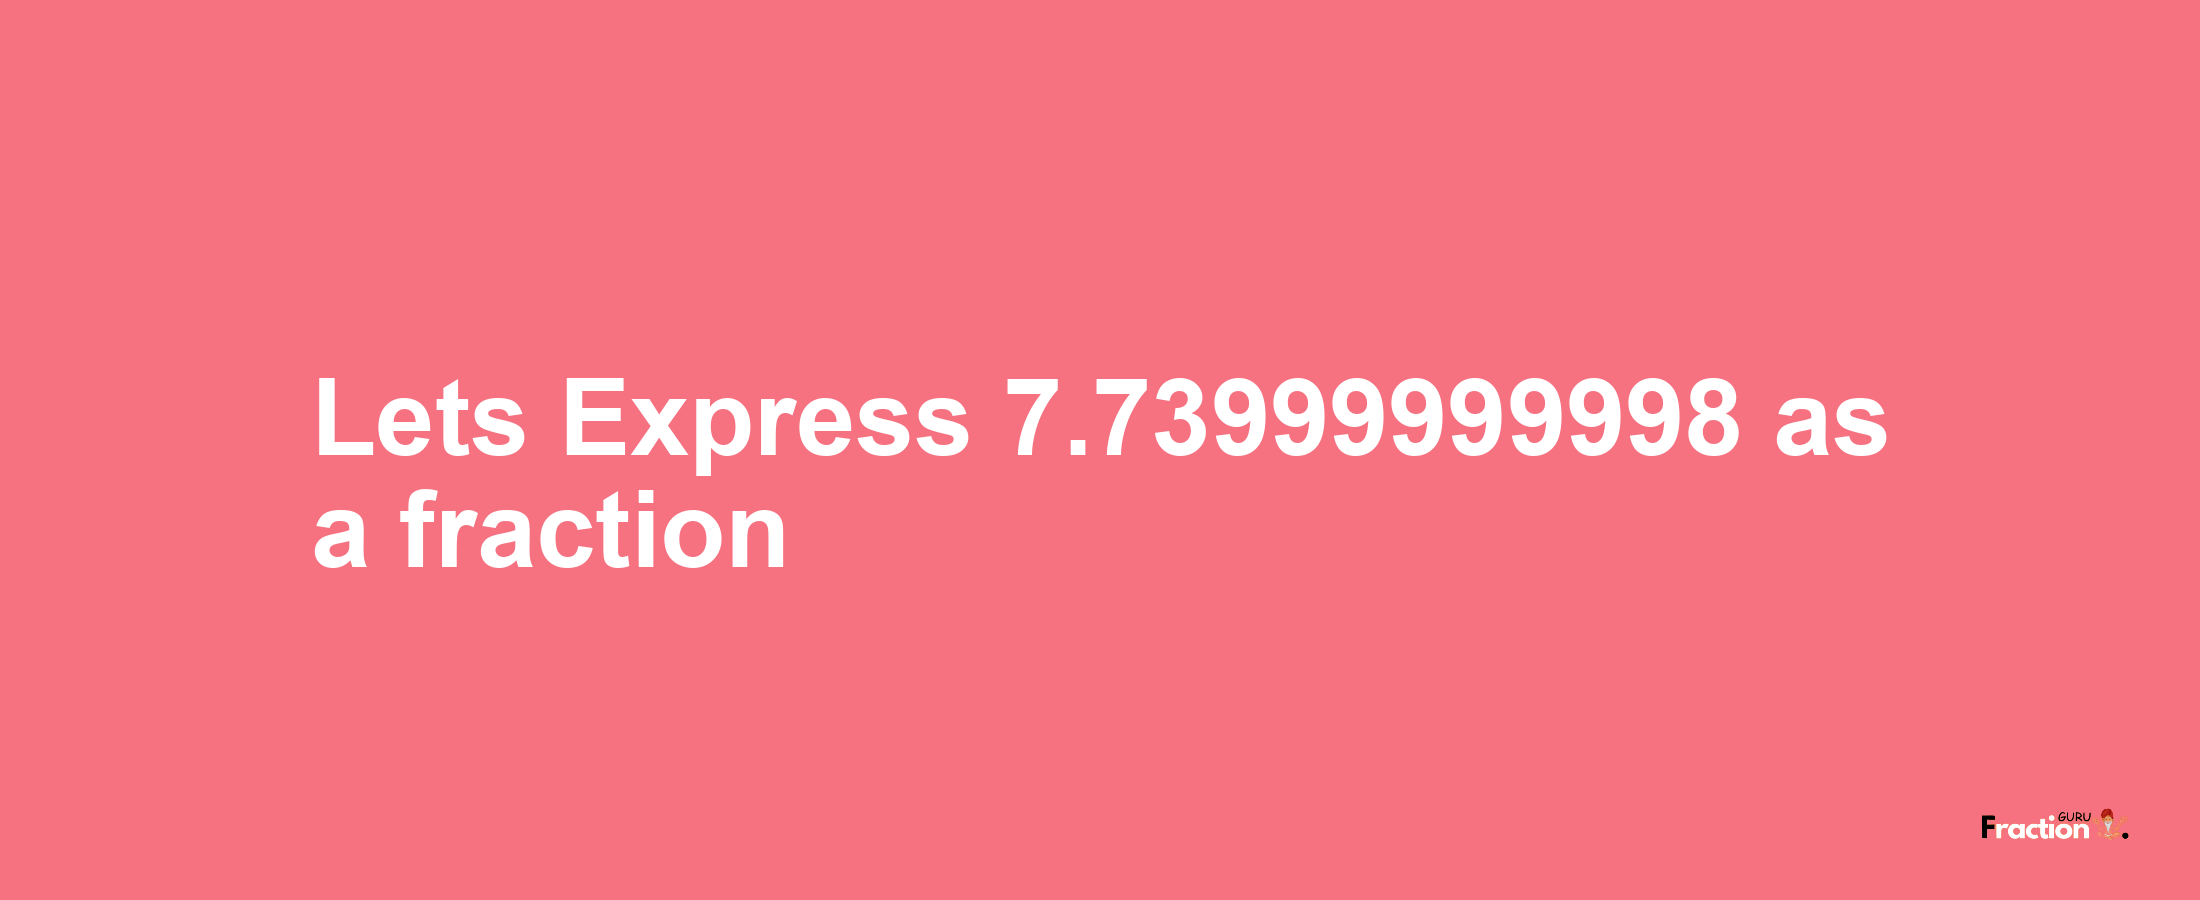 Lets Express 7.73999999998 as afraction